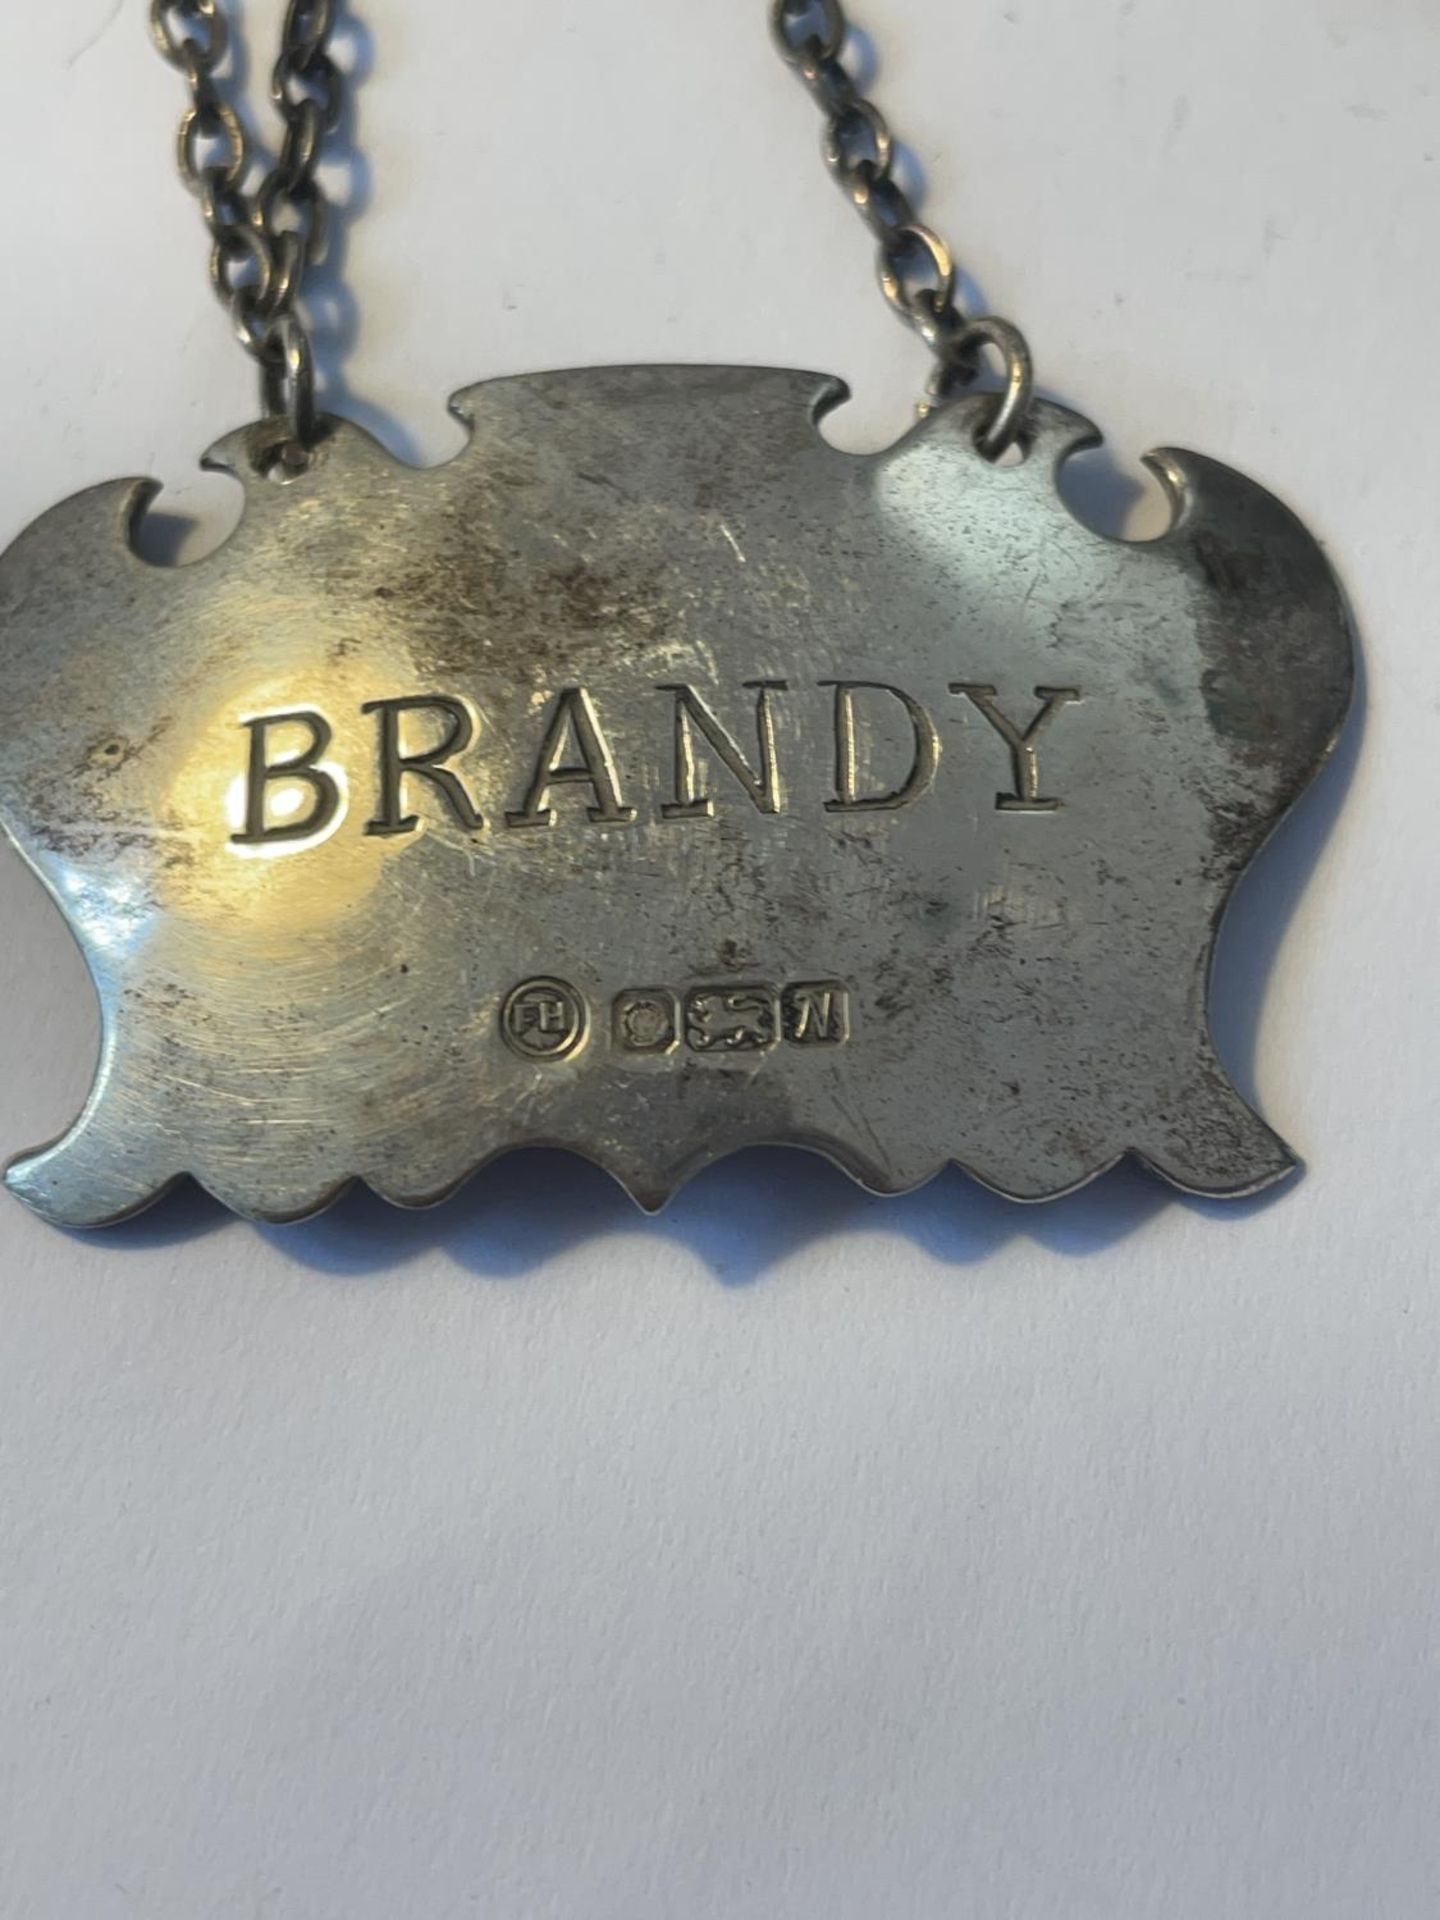 THREE HALLAMRKED SHEFFIELD SILVER DECANTER LABELS BRANDY, WHISKY AND GIN GROSS WEIGHT 44.5 GRAMS - Image 2 of 4